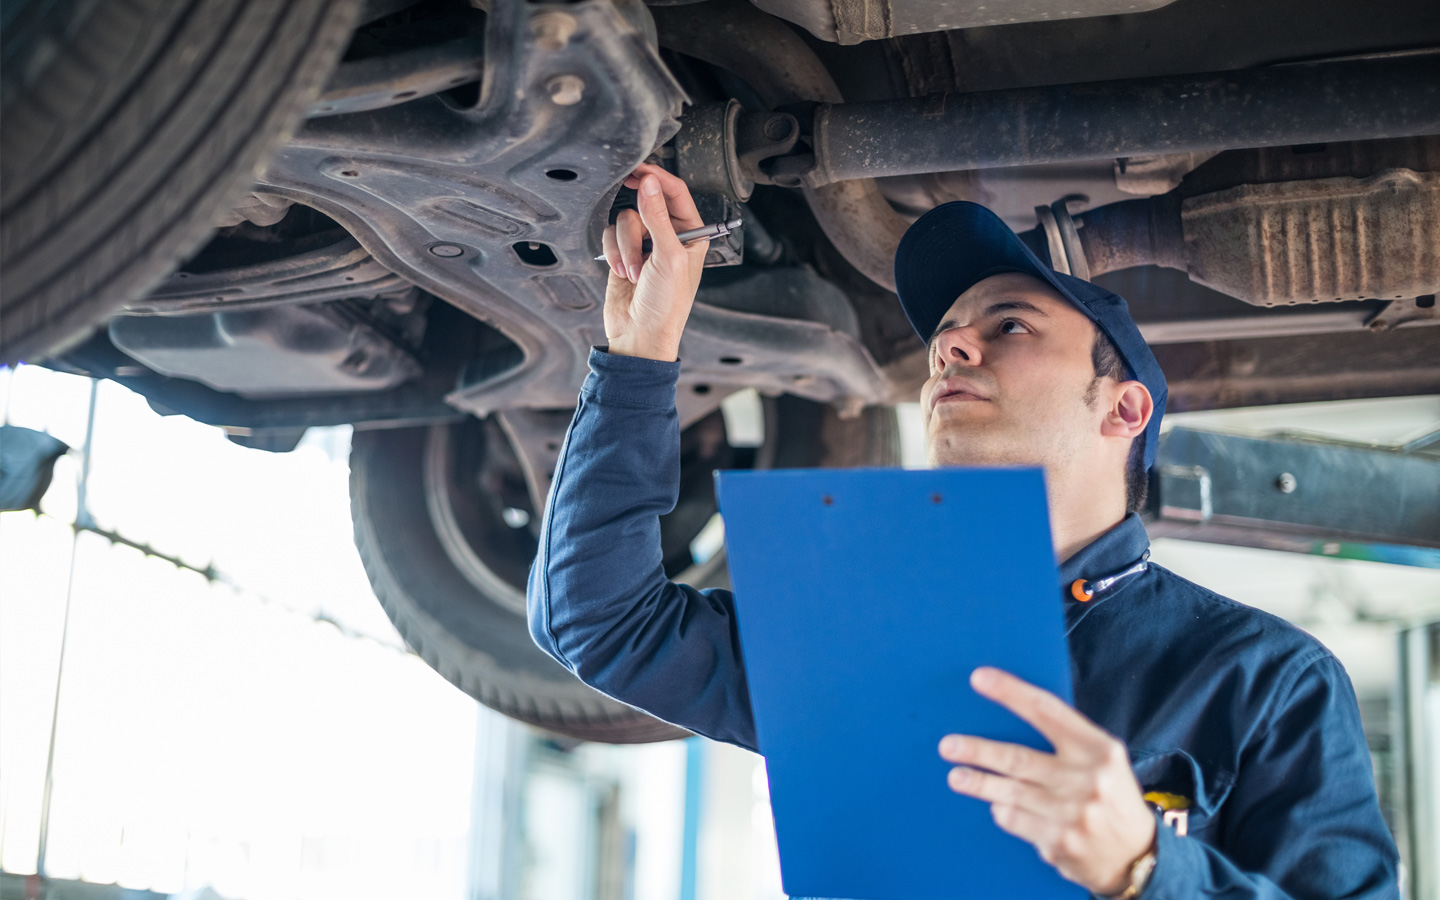 how long does a car inspection take? It can vary depending on the type of test and vehicle